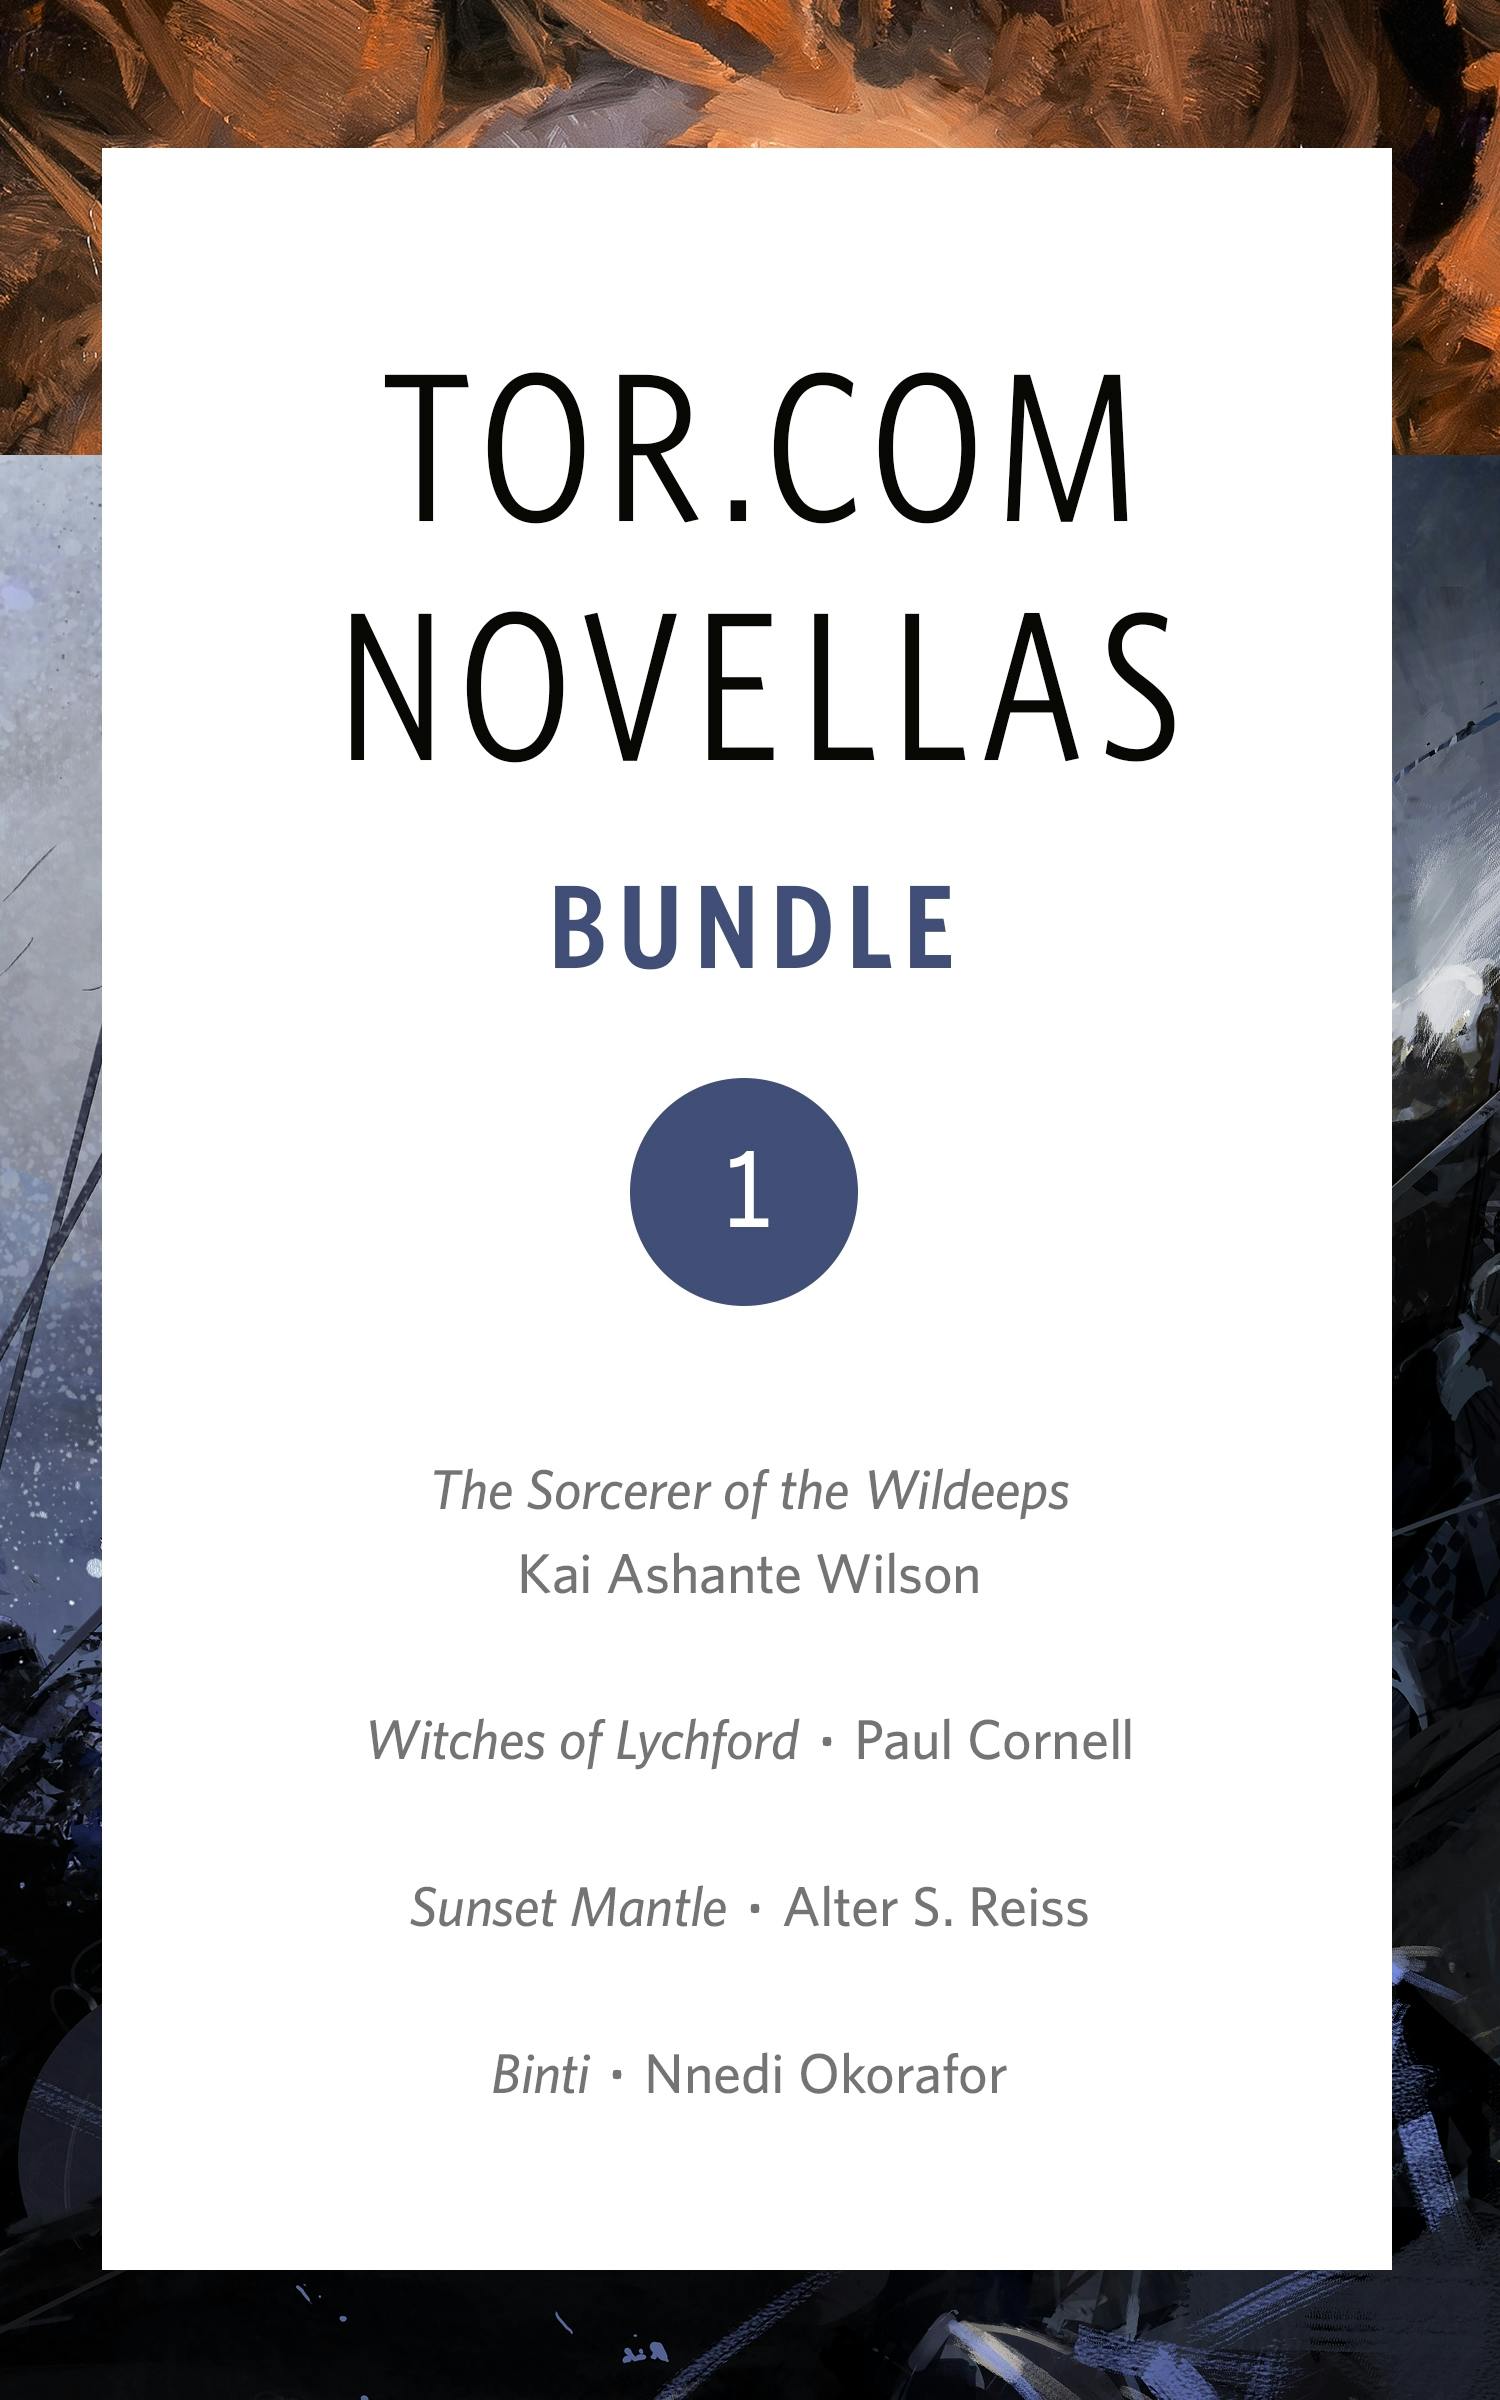 Cover for the book titled as: Tor.com Bundle 1 - September 2015